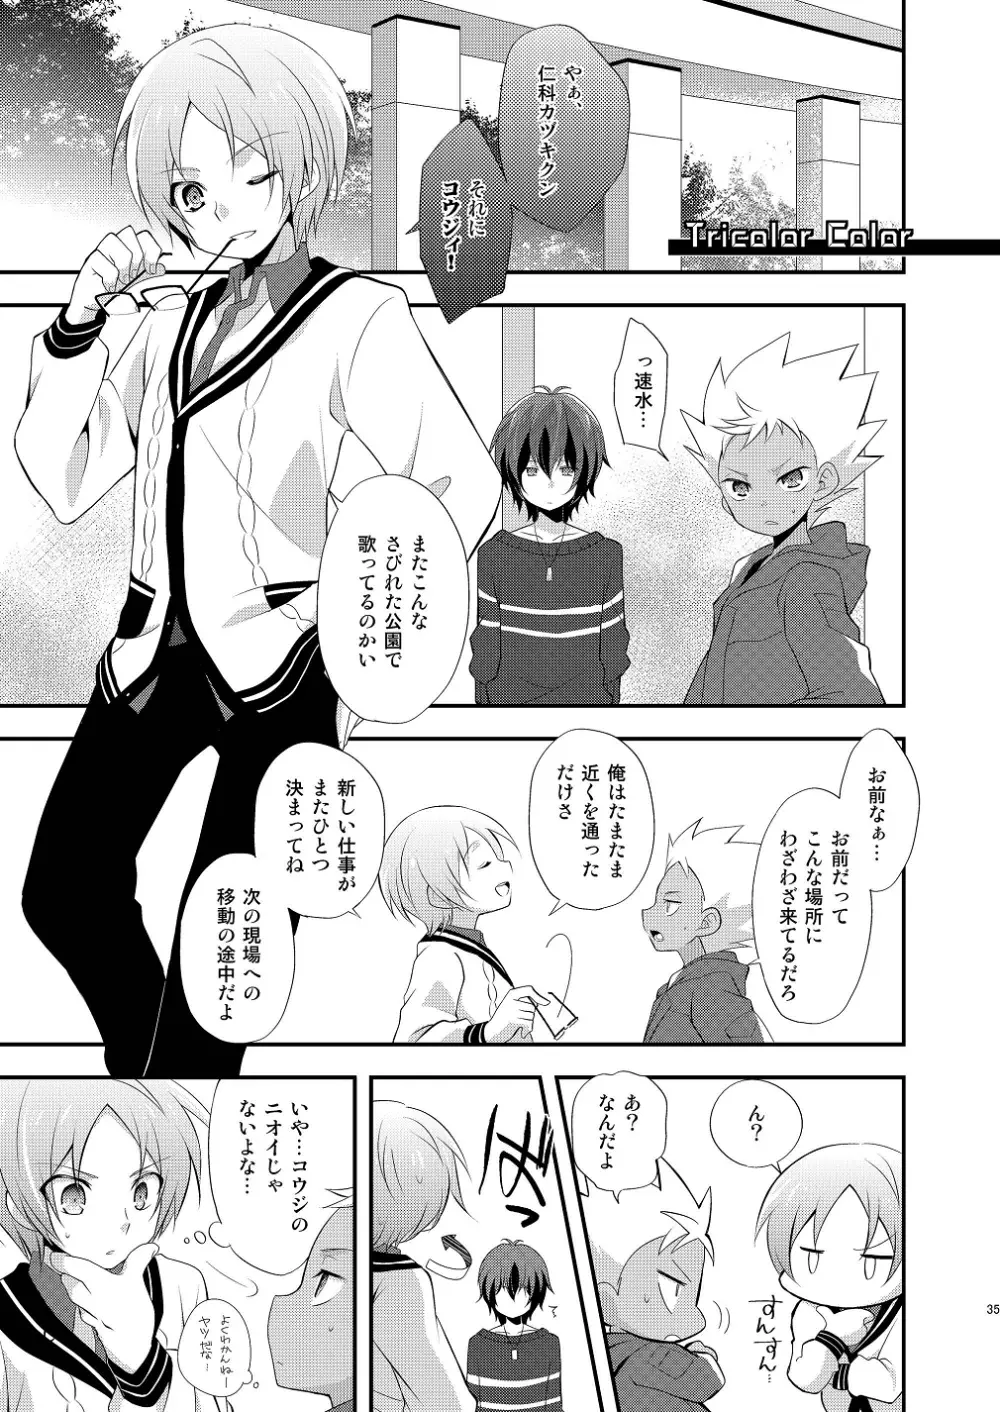 Tricolor Party - page35